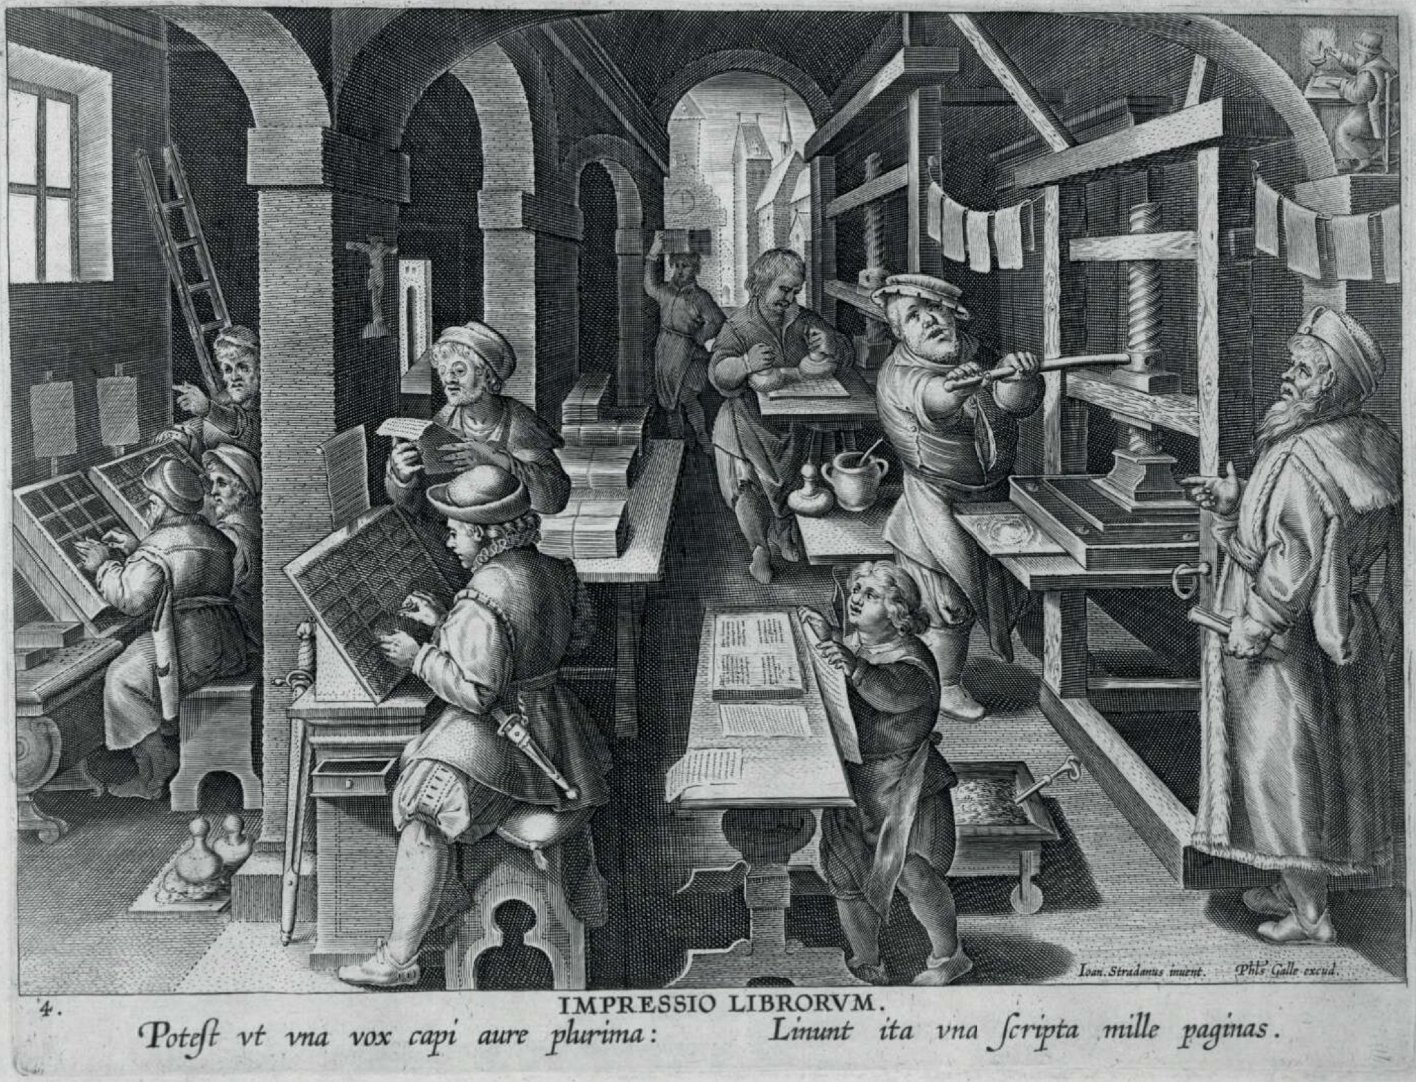 A 16th century print showing multiple people working in a renaissance period print shop.